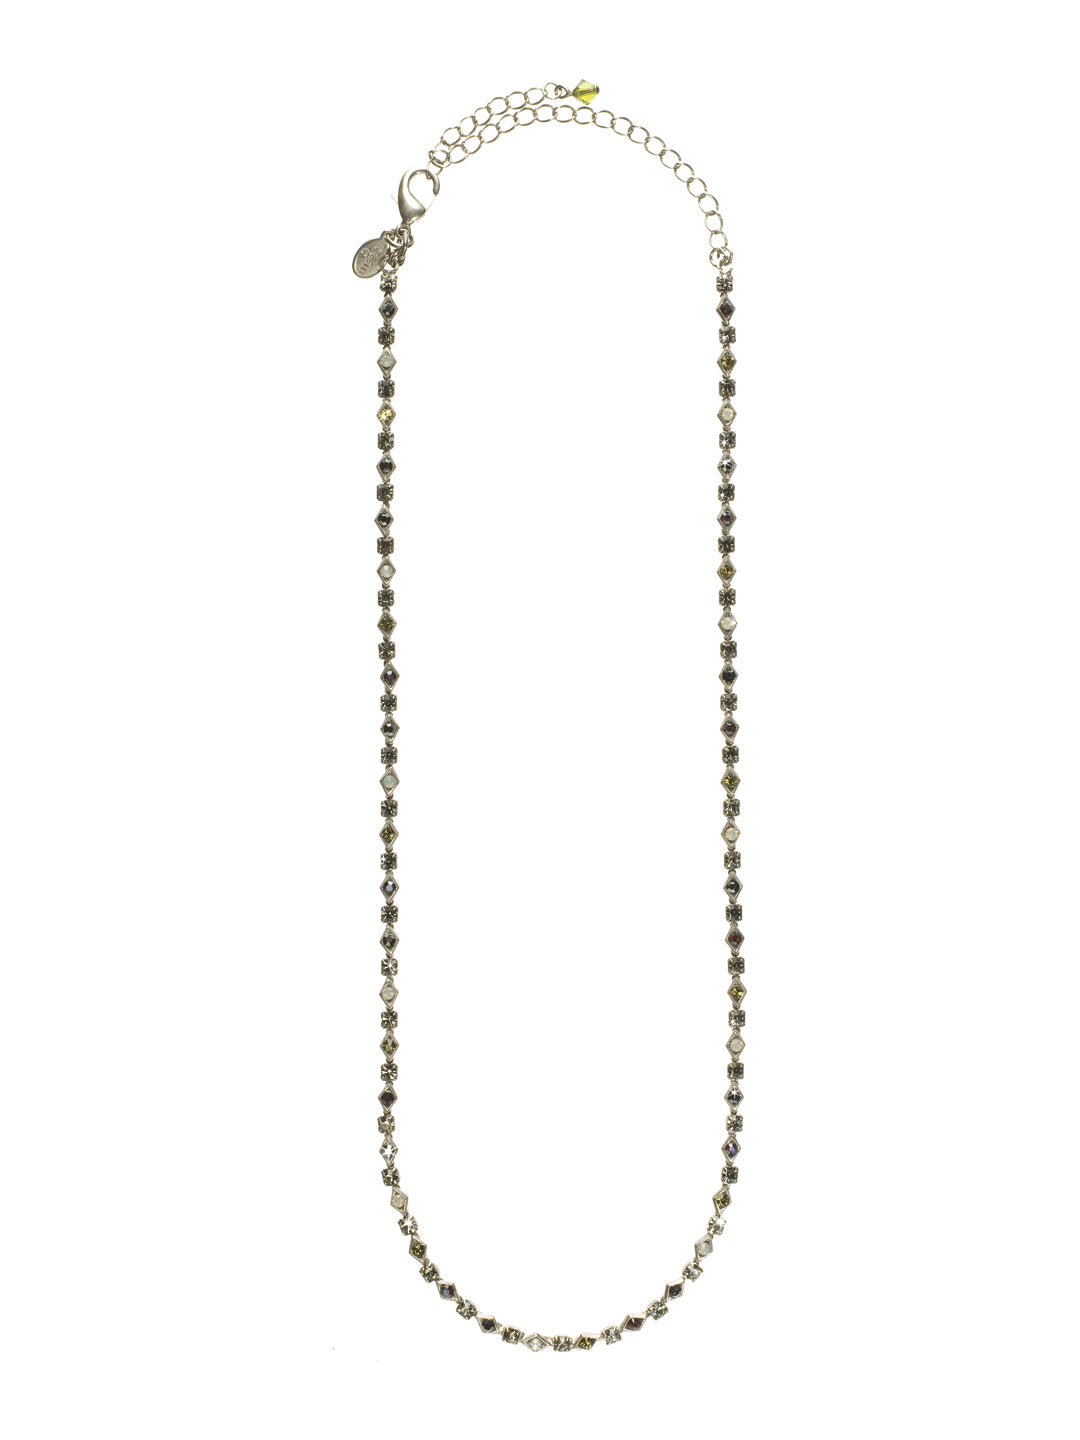 Delicate Drapery Necklace Long Necklace - NCM4ASCJ - Drape yourself in elegance and sparkle with this long necklace. Delicate square, diamond, and round shaped crystals catch the light as you work the room. From Sorrelli's Concrete Jungle collection in our Antique Silver-tone finish.